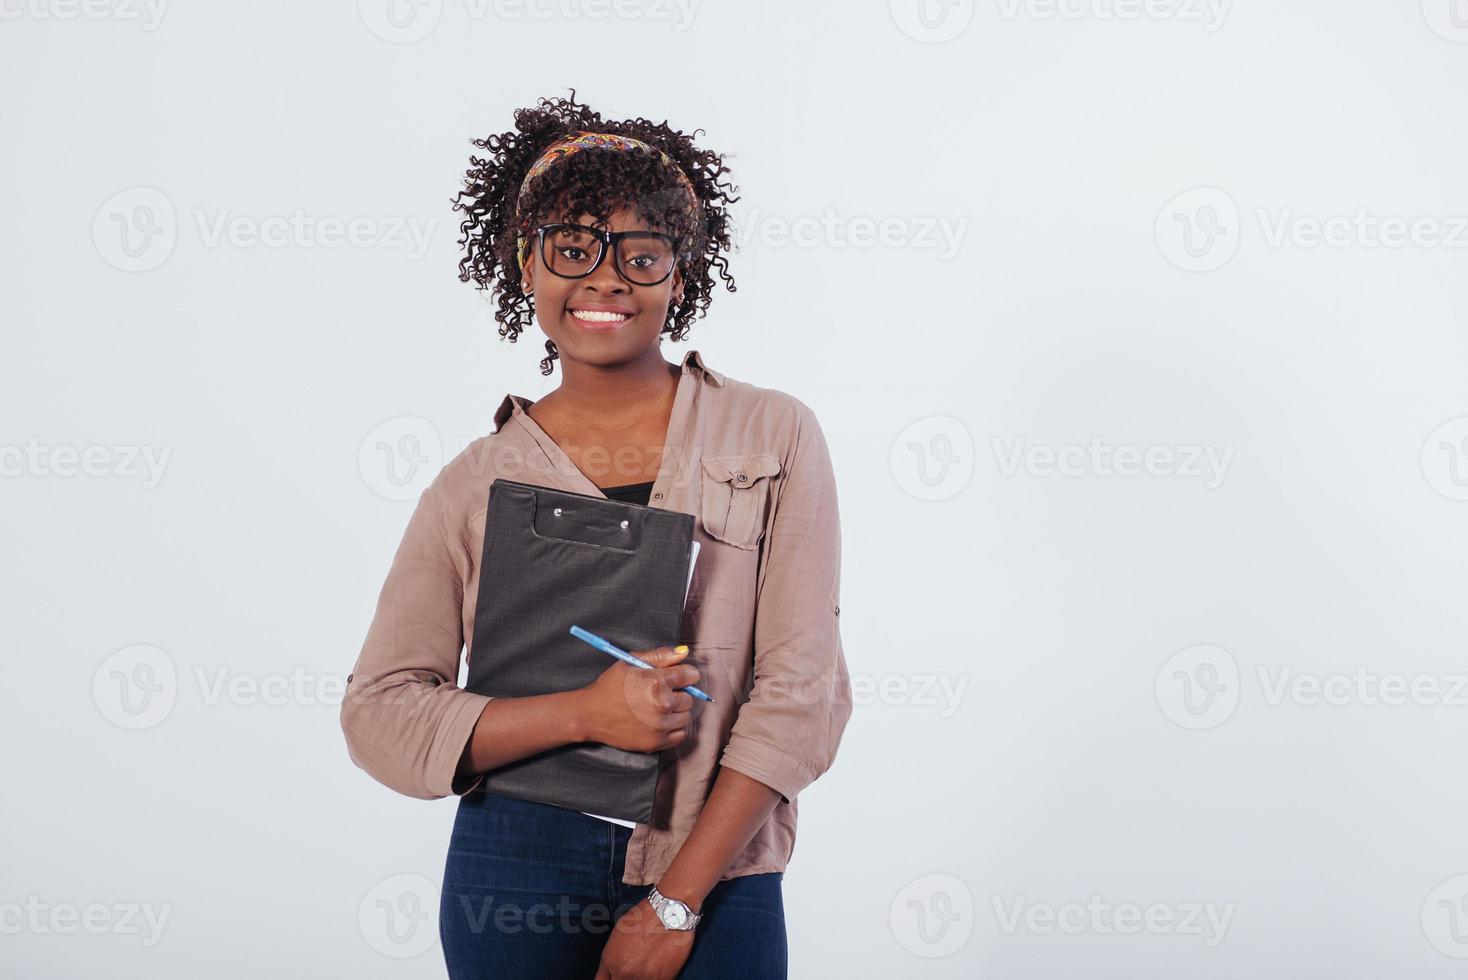 Conception of education. Beautiful afro american girl with curly hair in the studio with white background photo